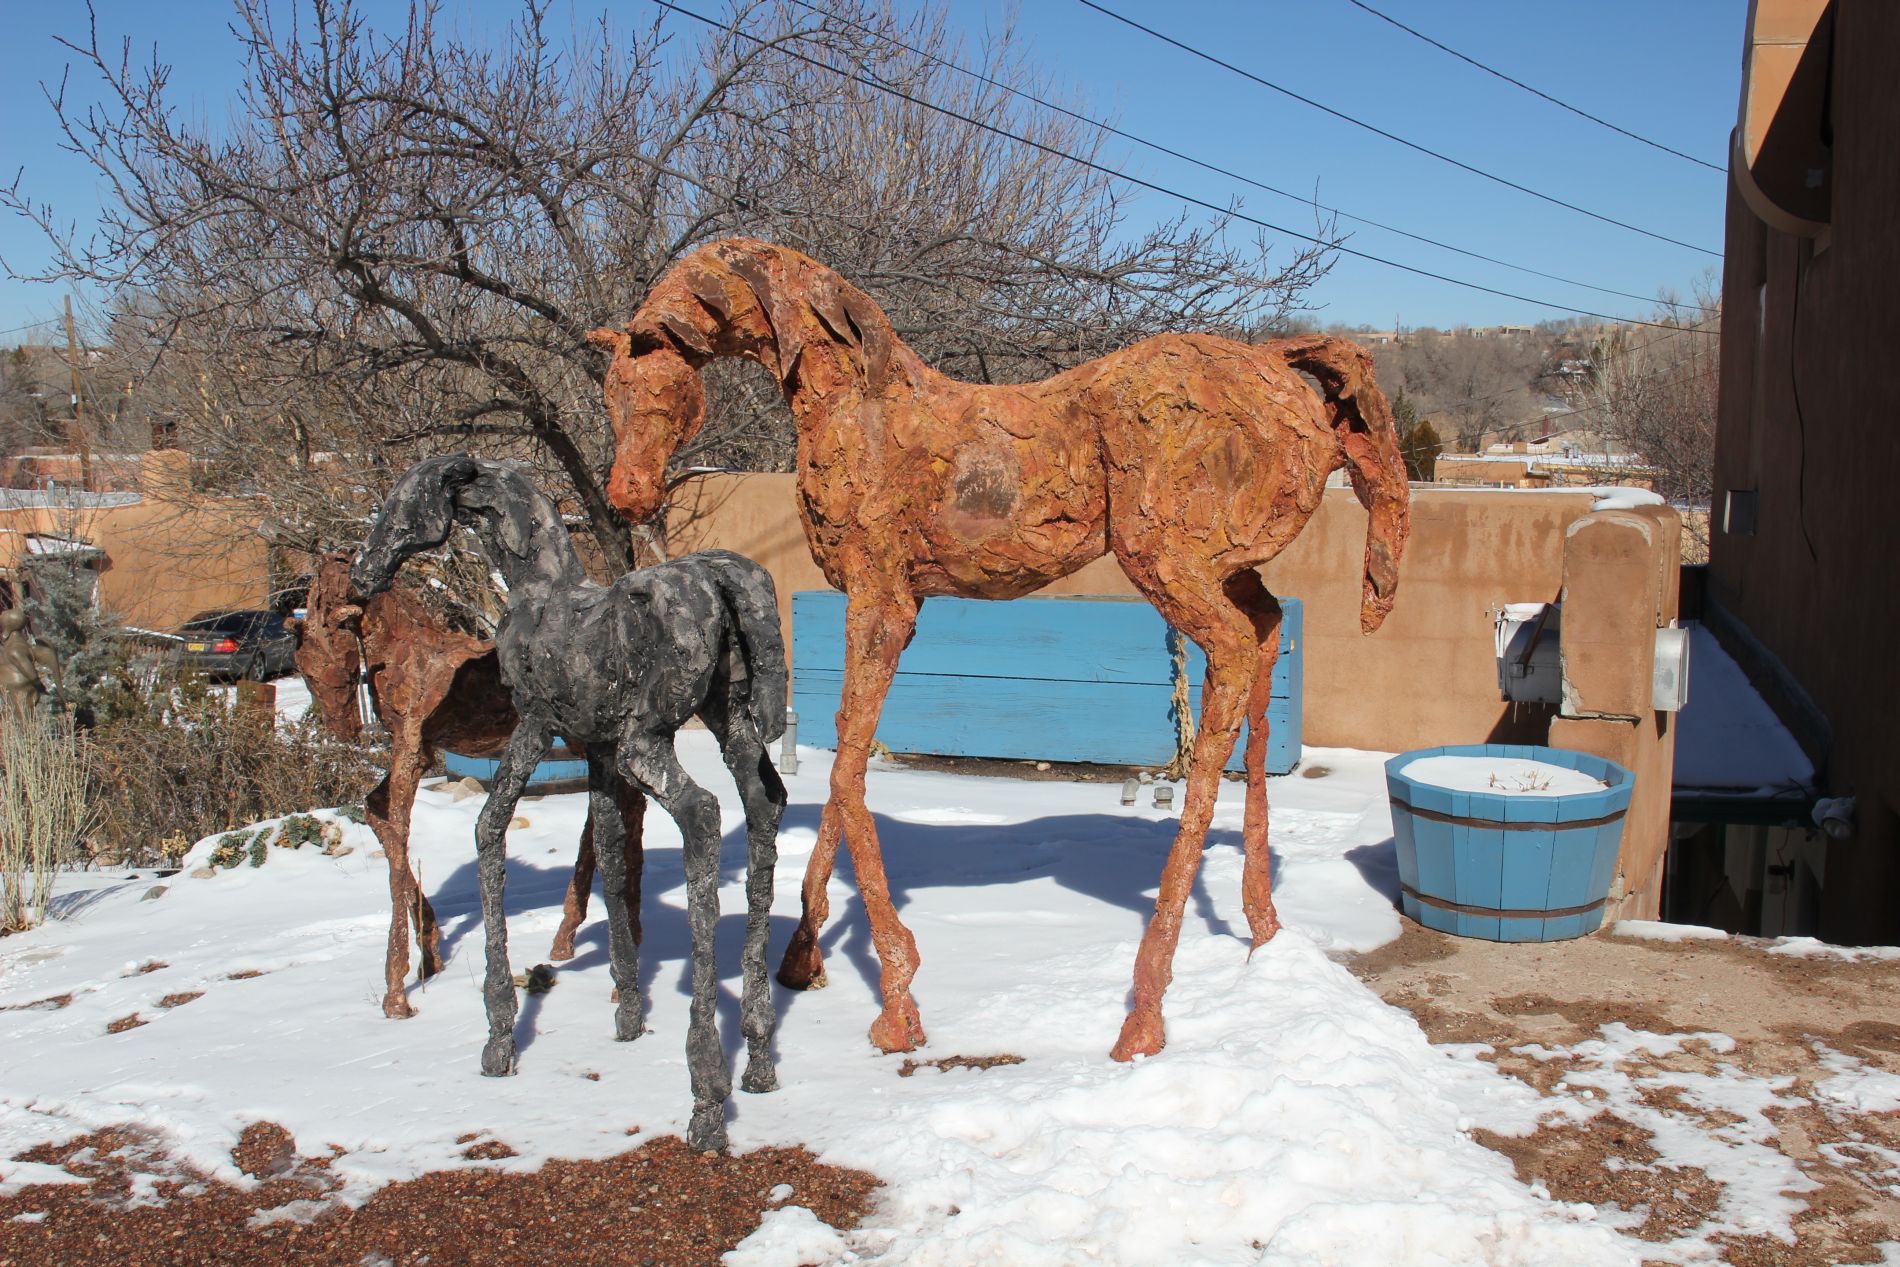 Horse statues on Canyon Road in Santa Fe, New Mexico